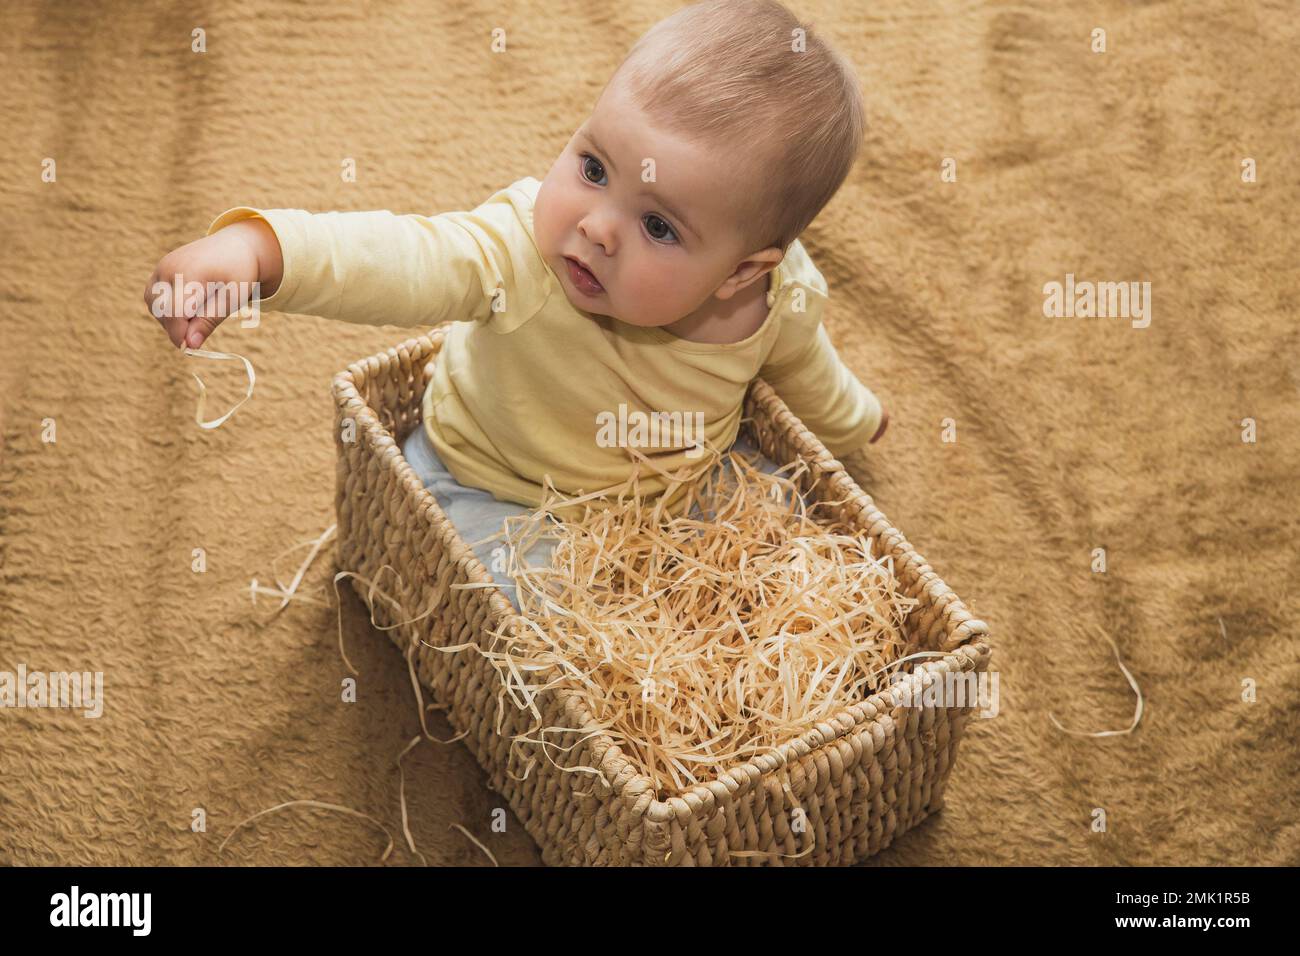 charming Baby sitting in a square wicker basket with straw Stock Photo